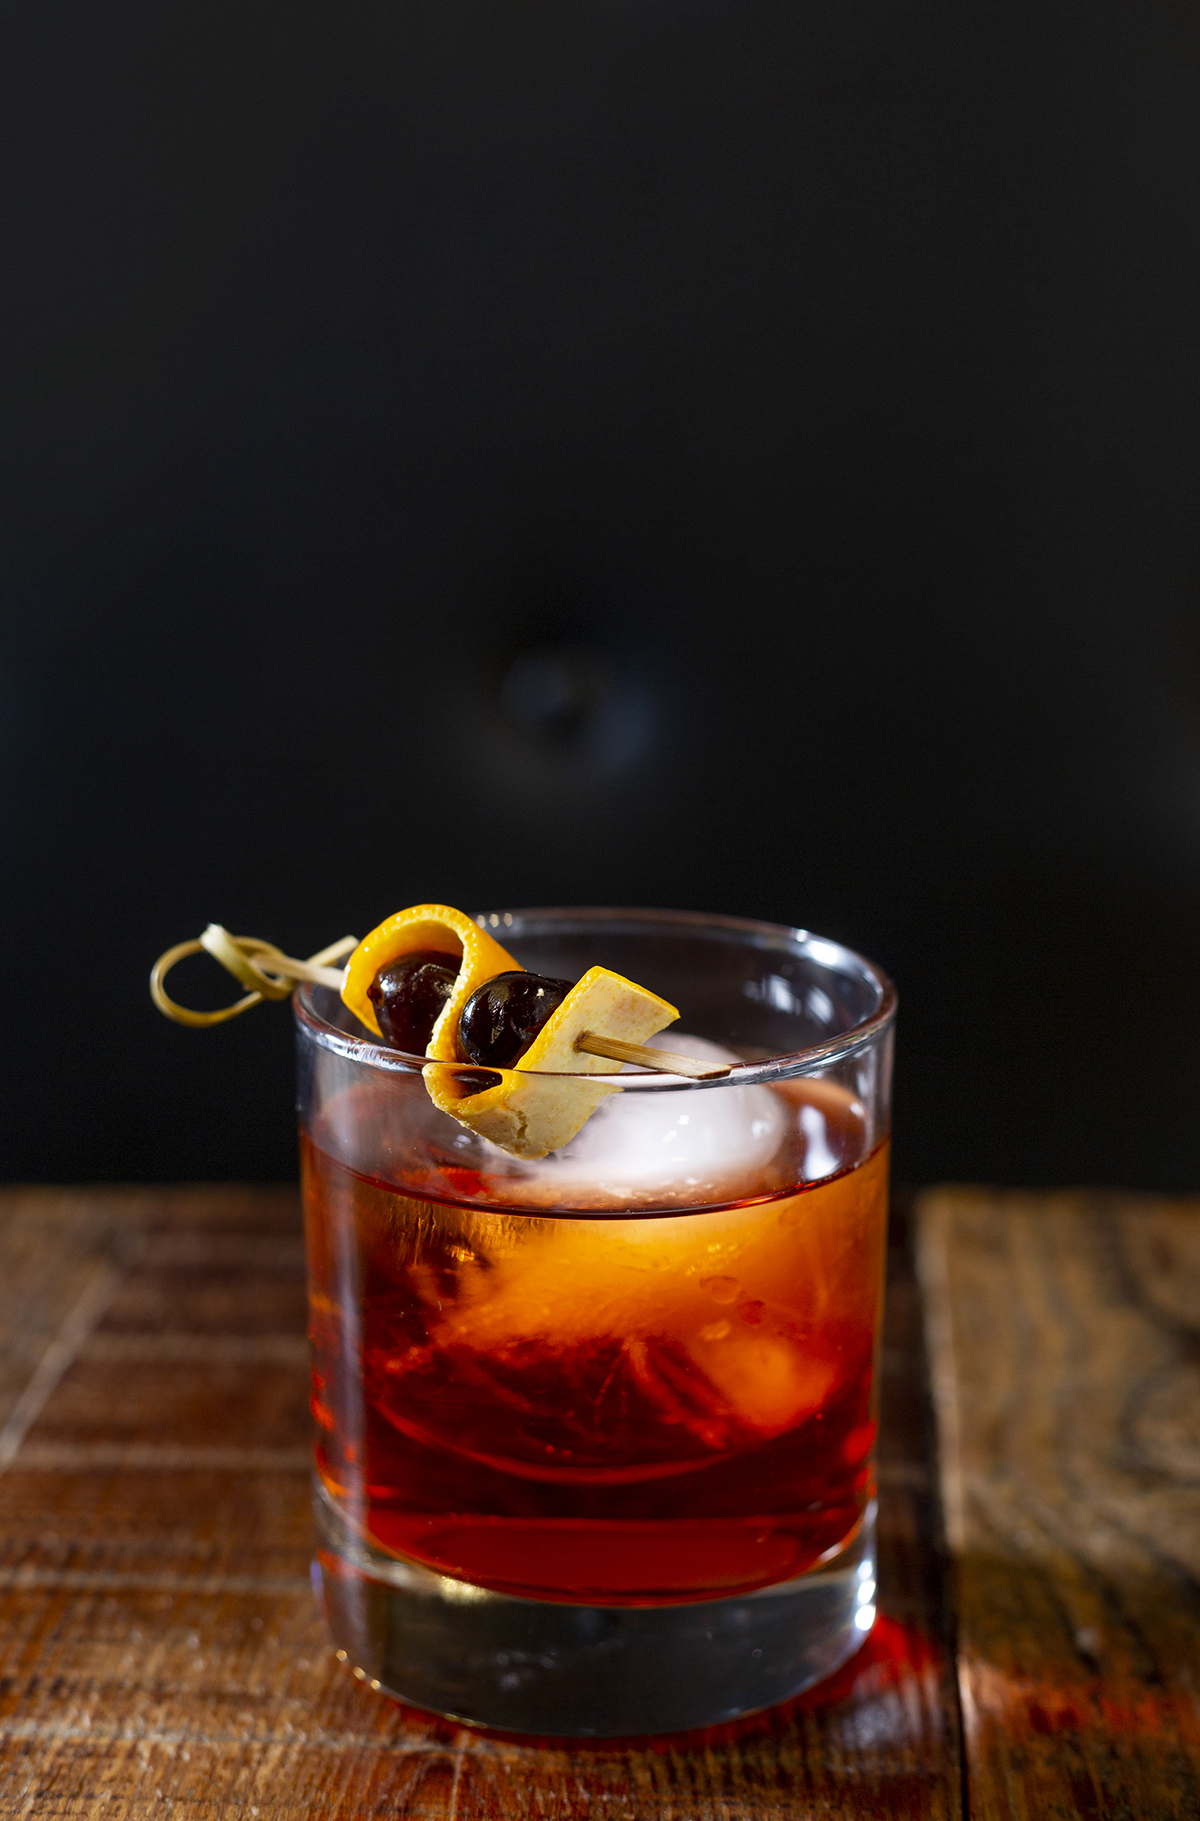 A whiskey drink on a wooden table with a dark background and smokey light